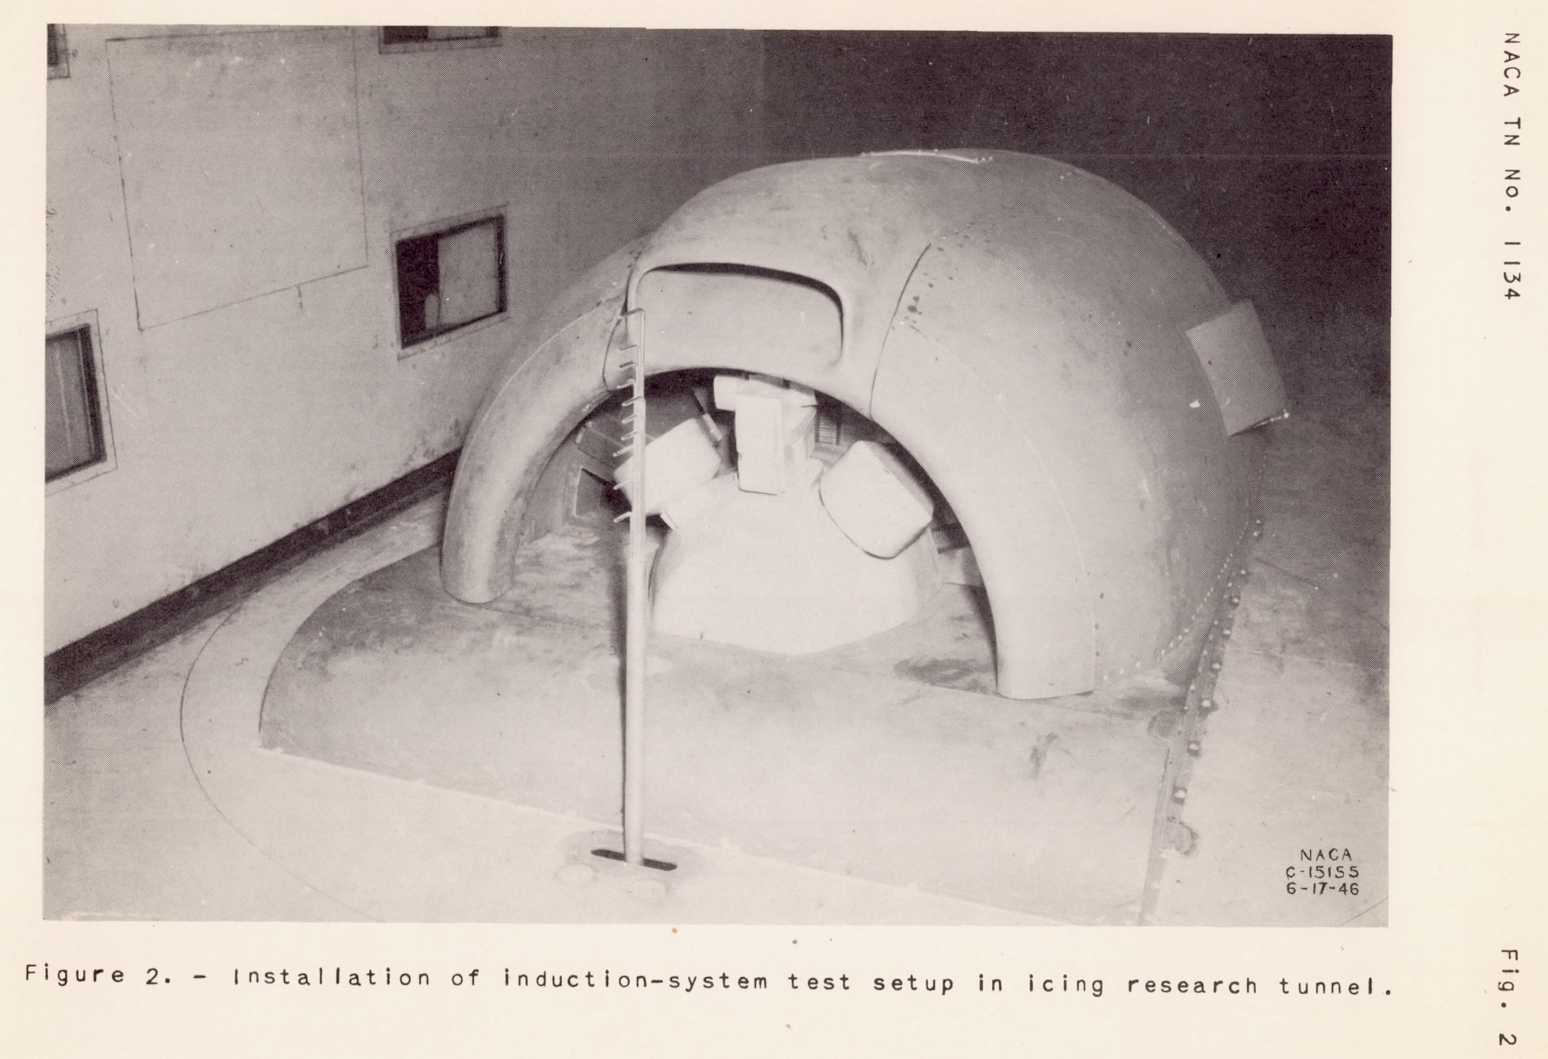 Figure 2 of NACA-TN-1134. Installation of induction-system test setup in icing research tunnel.